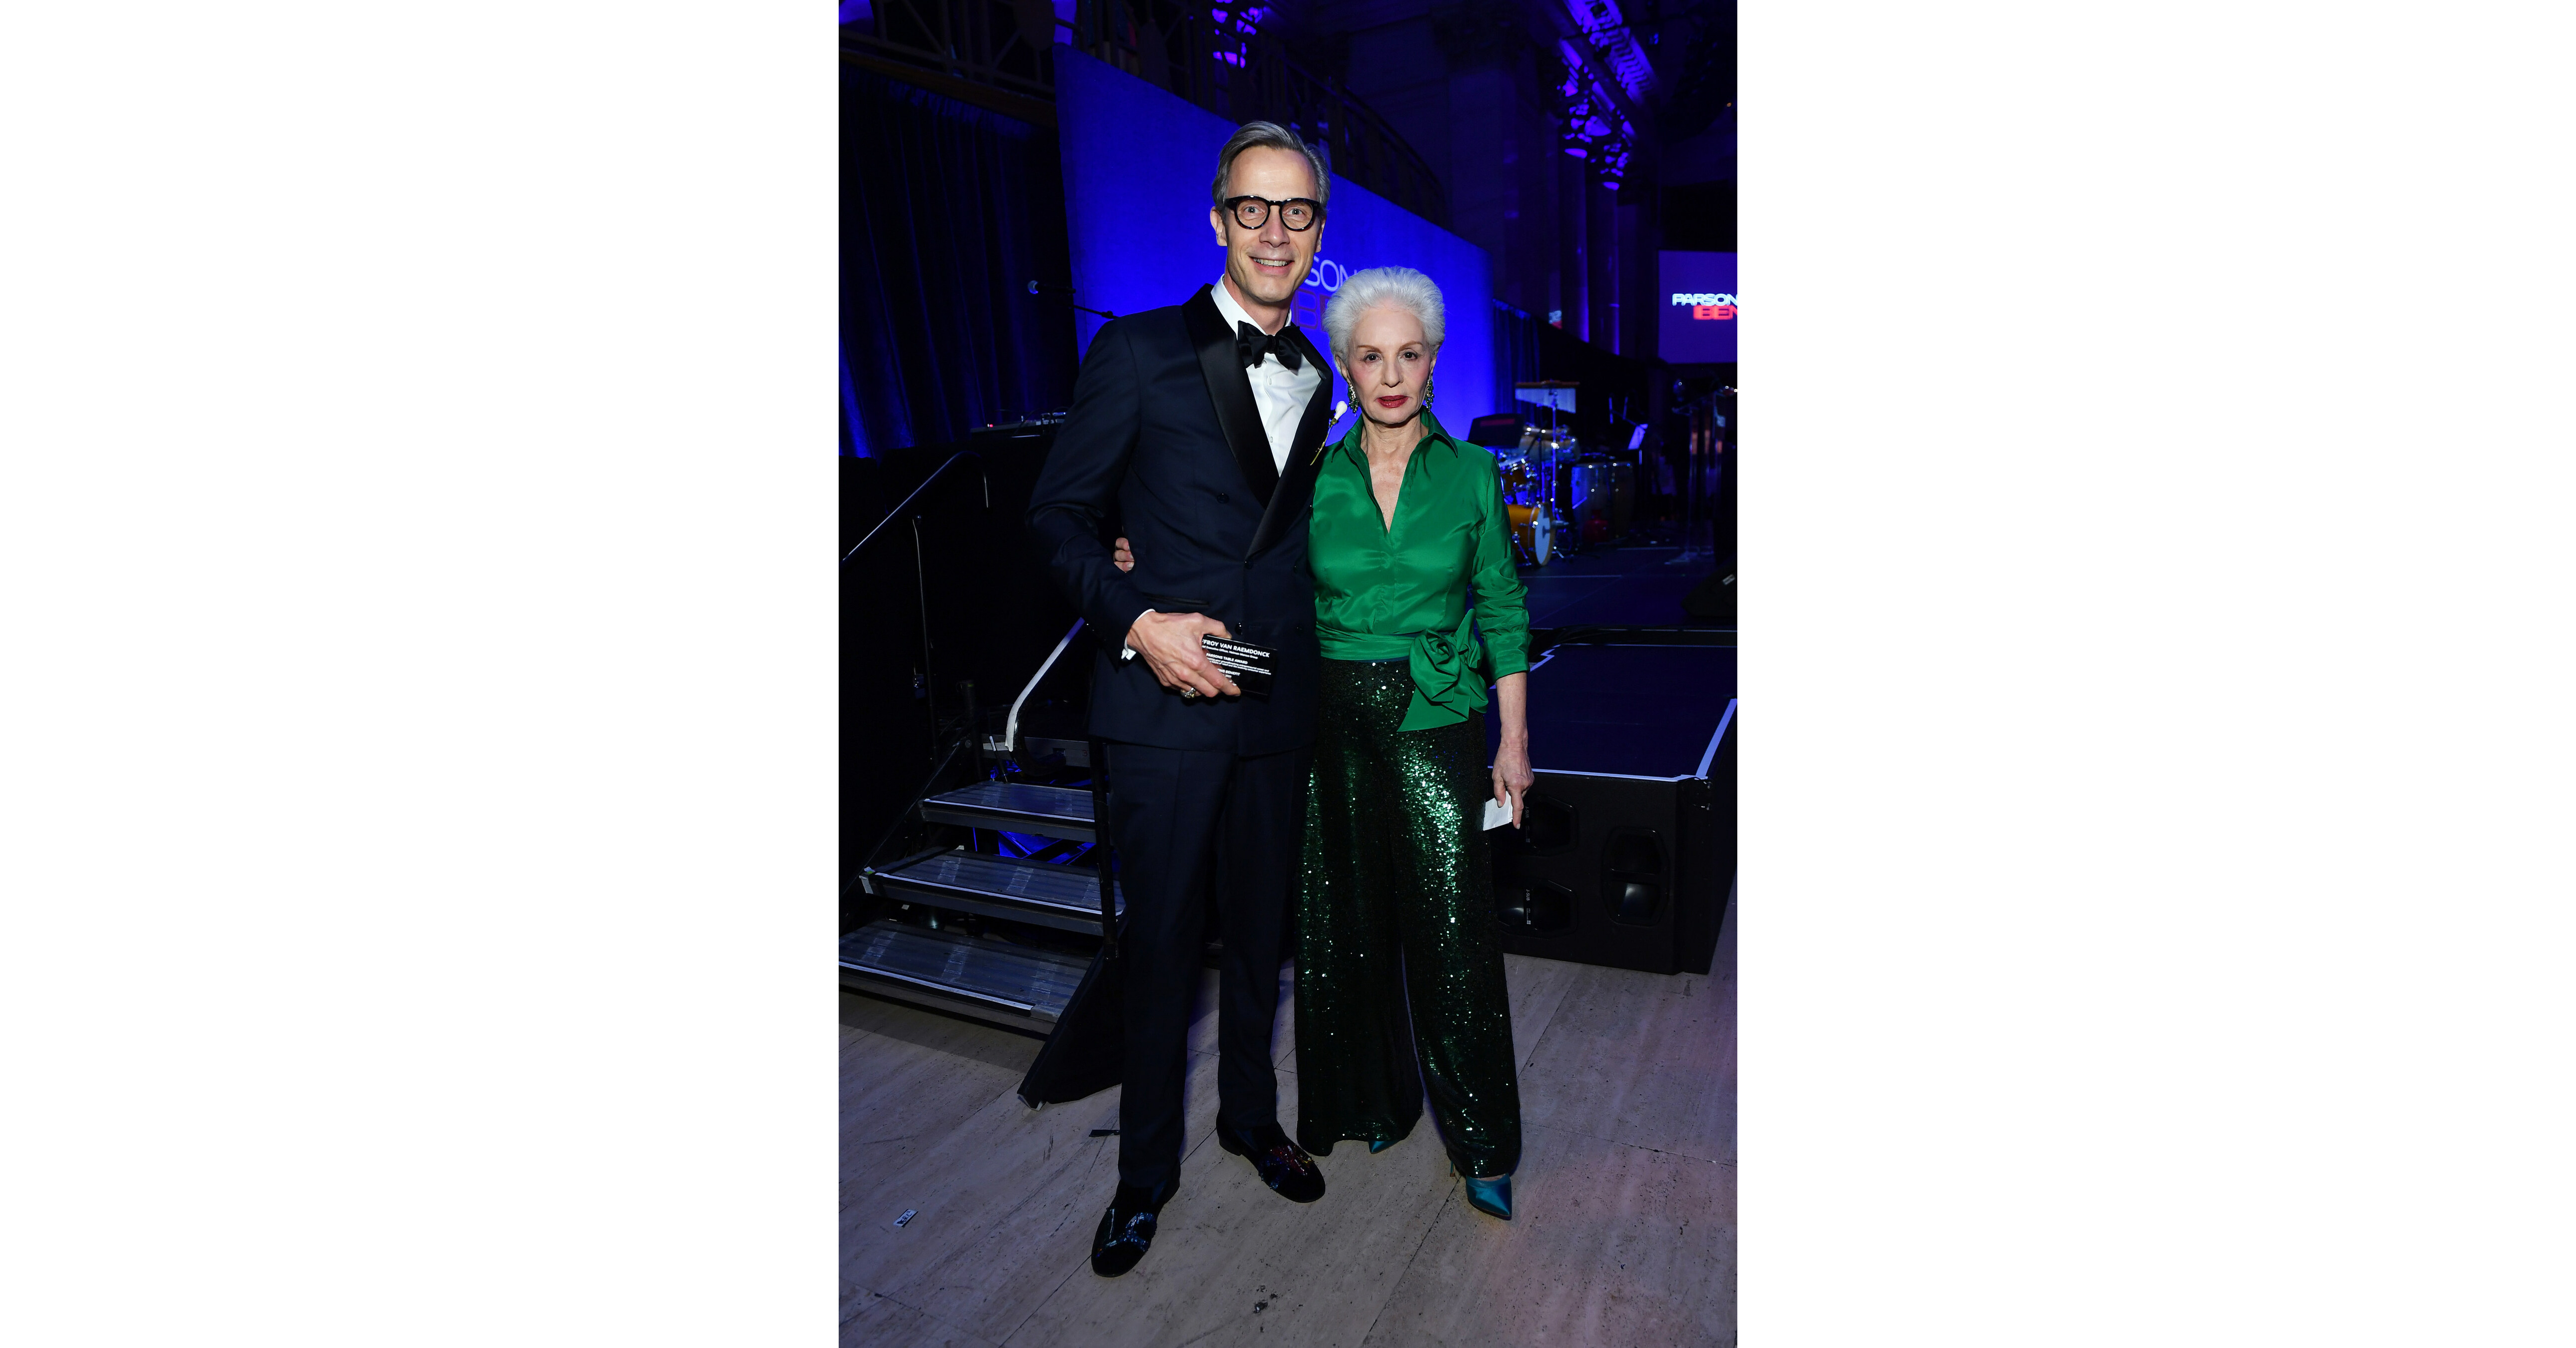 Neiman Marcus Group CEO Geoffroy van Raemdonck Honored at the 74th